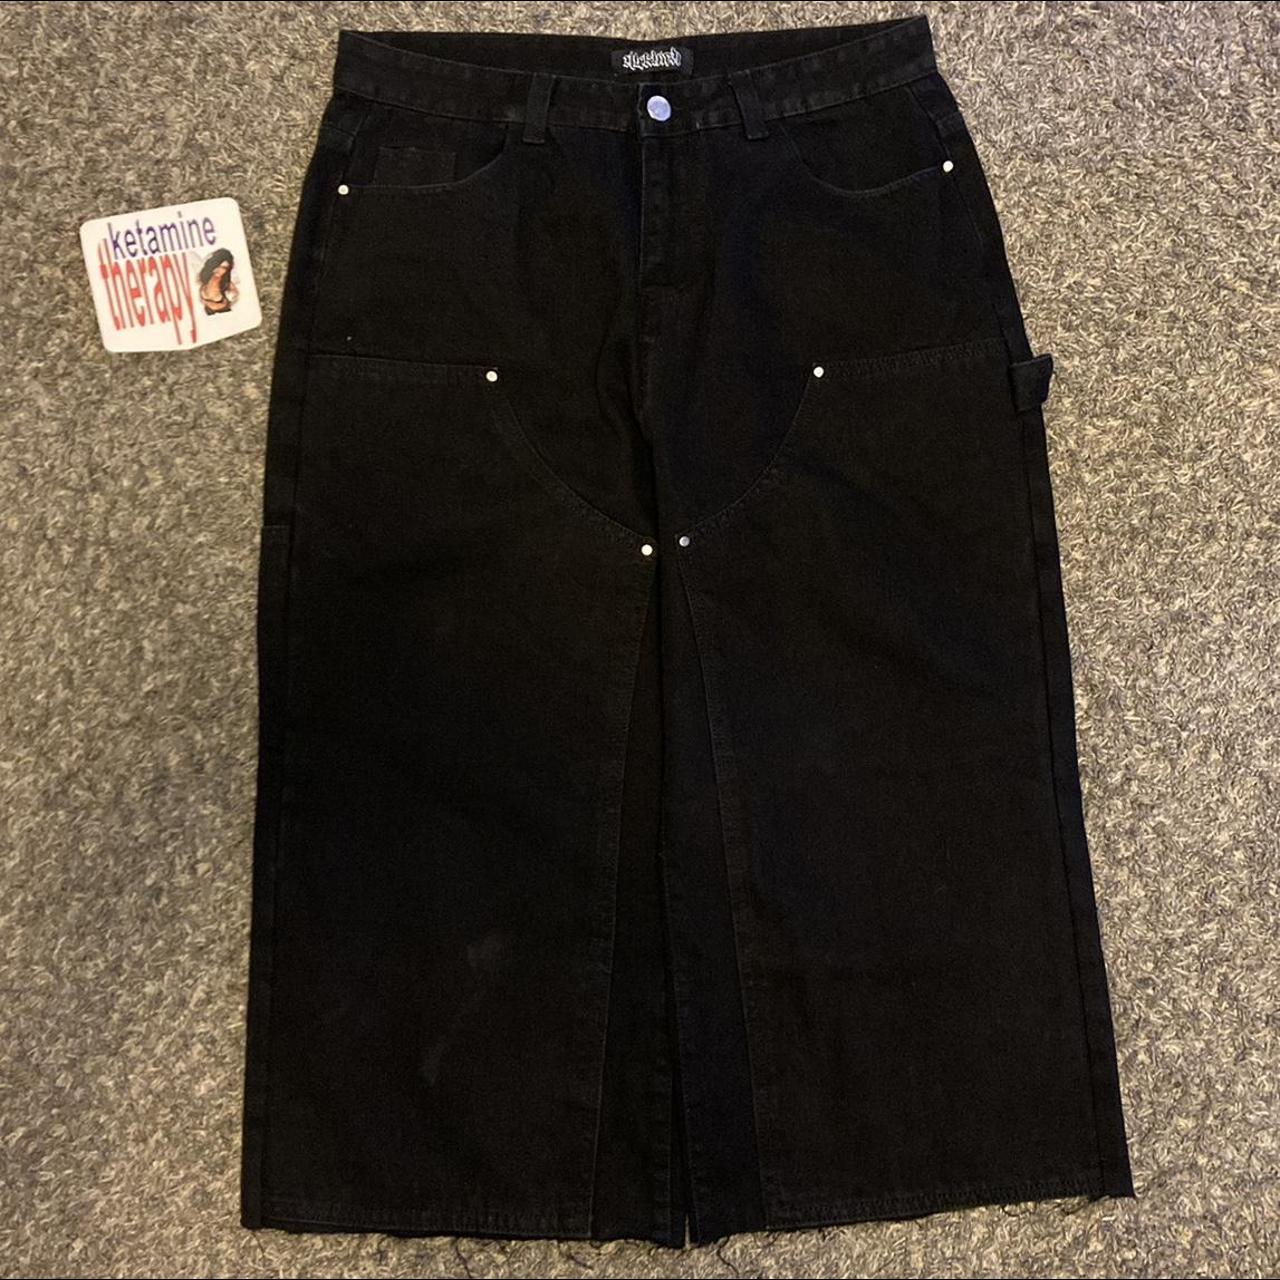 NICKITTEN EXTREMELY BAGGY BARBWIRE EMBROIDERED... - Depop